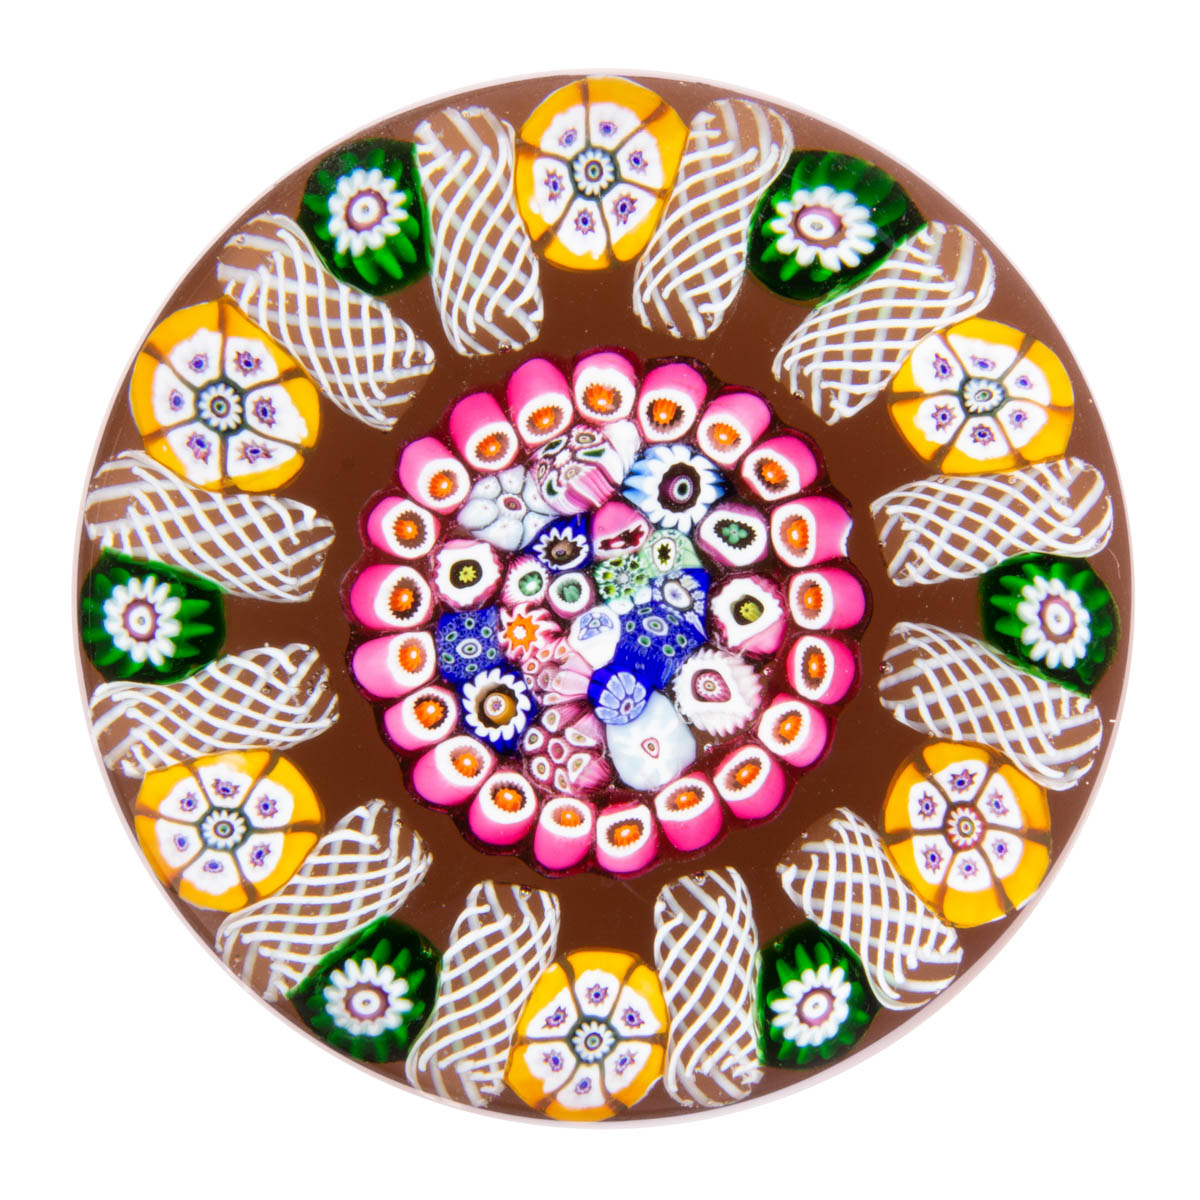 PAUL YSART (SCOTTISH, 1904-1979) ATTRIBUTED CENTRAL-PACKED MILLEFIORI ART GLASS PAPERWEIGHT